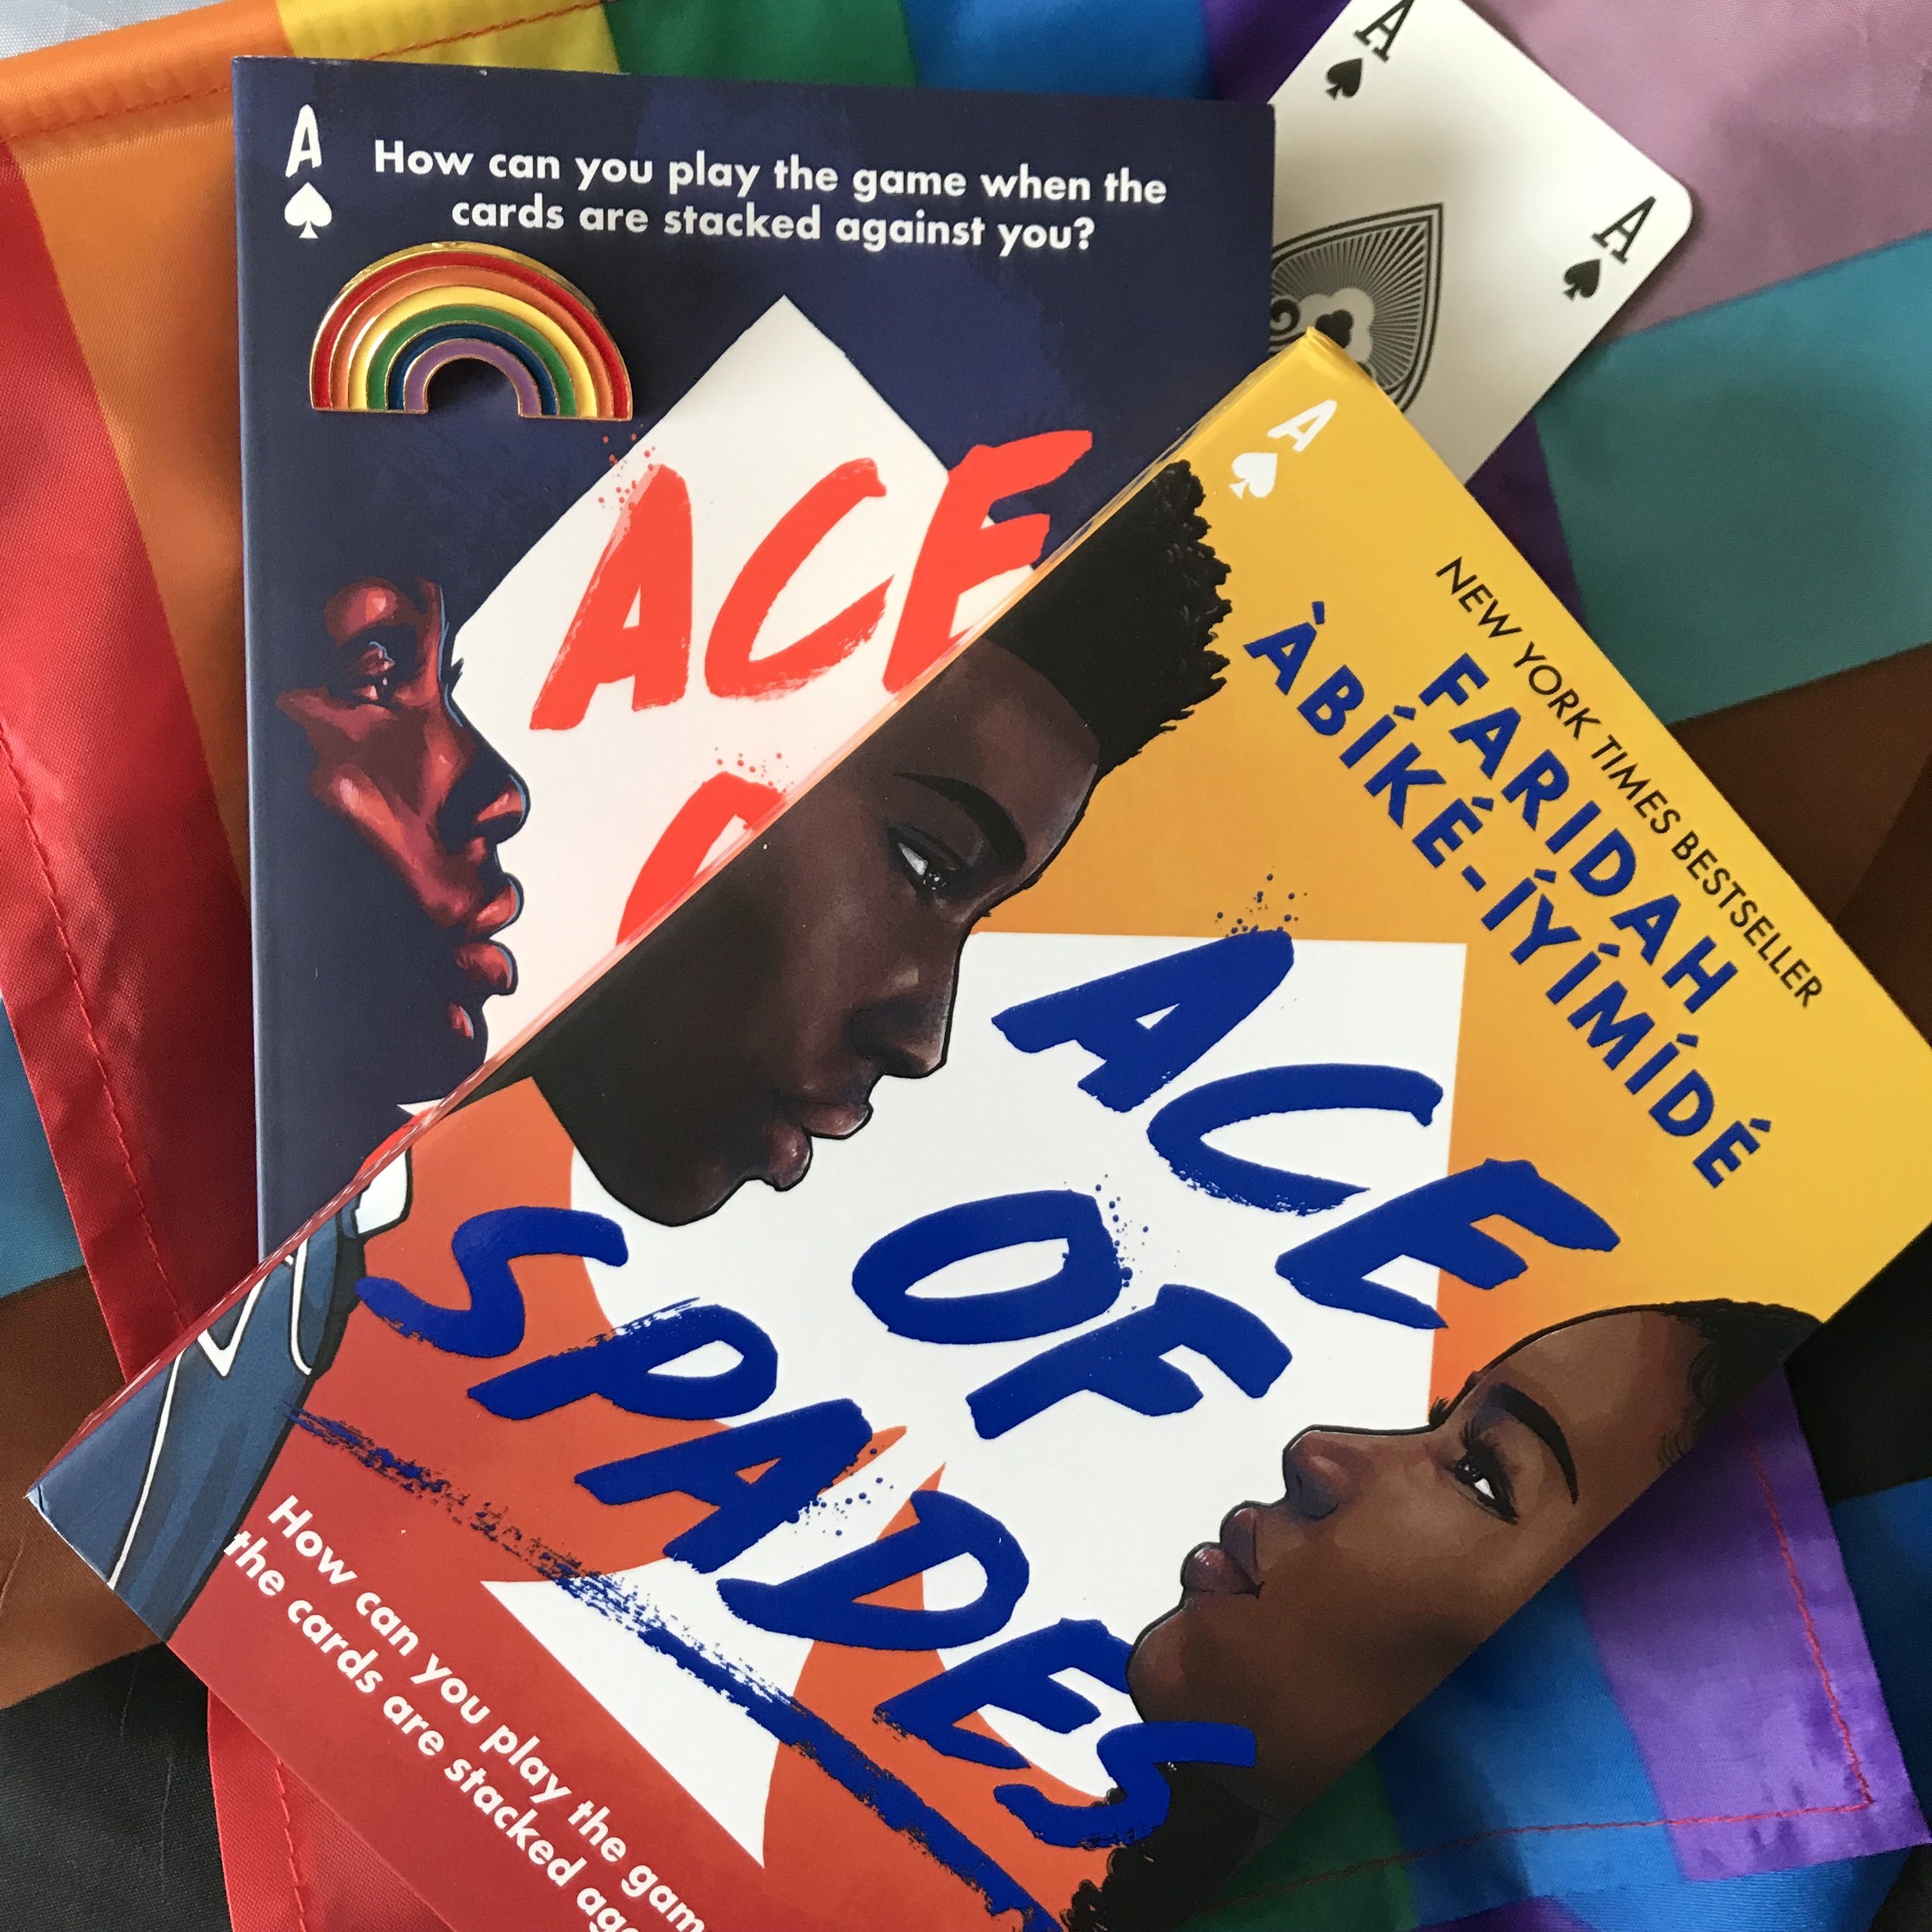 A photo of both editions of Ace of Spades by Faridah Àbíké-Íyímídé; the original edition of the book with the navy blue cover at the bottom, vertical, and the one year anniversary edition with the yellow/orange ombre cover on top, at a diagonal, pointing top right. There is a rainbow pin sittong on the top left corner of the original edition, and a ace of spades playing card poking out from under the two books, top left. They're on a rainbow flag, which is on a larger Pride flag, showing the black and brown stripes.